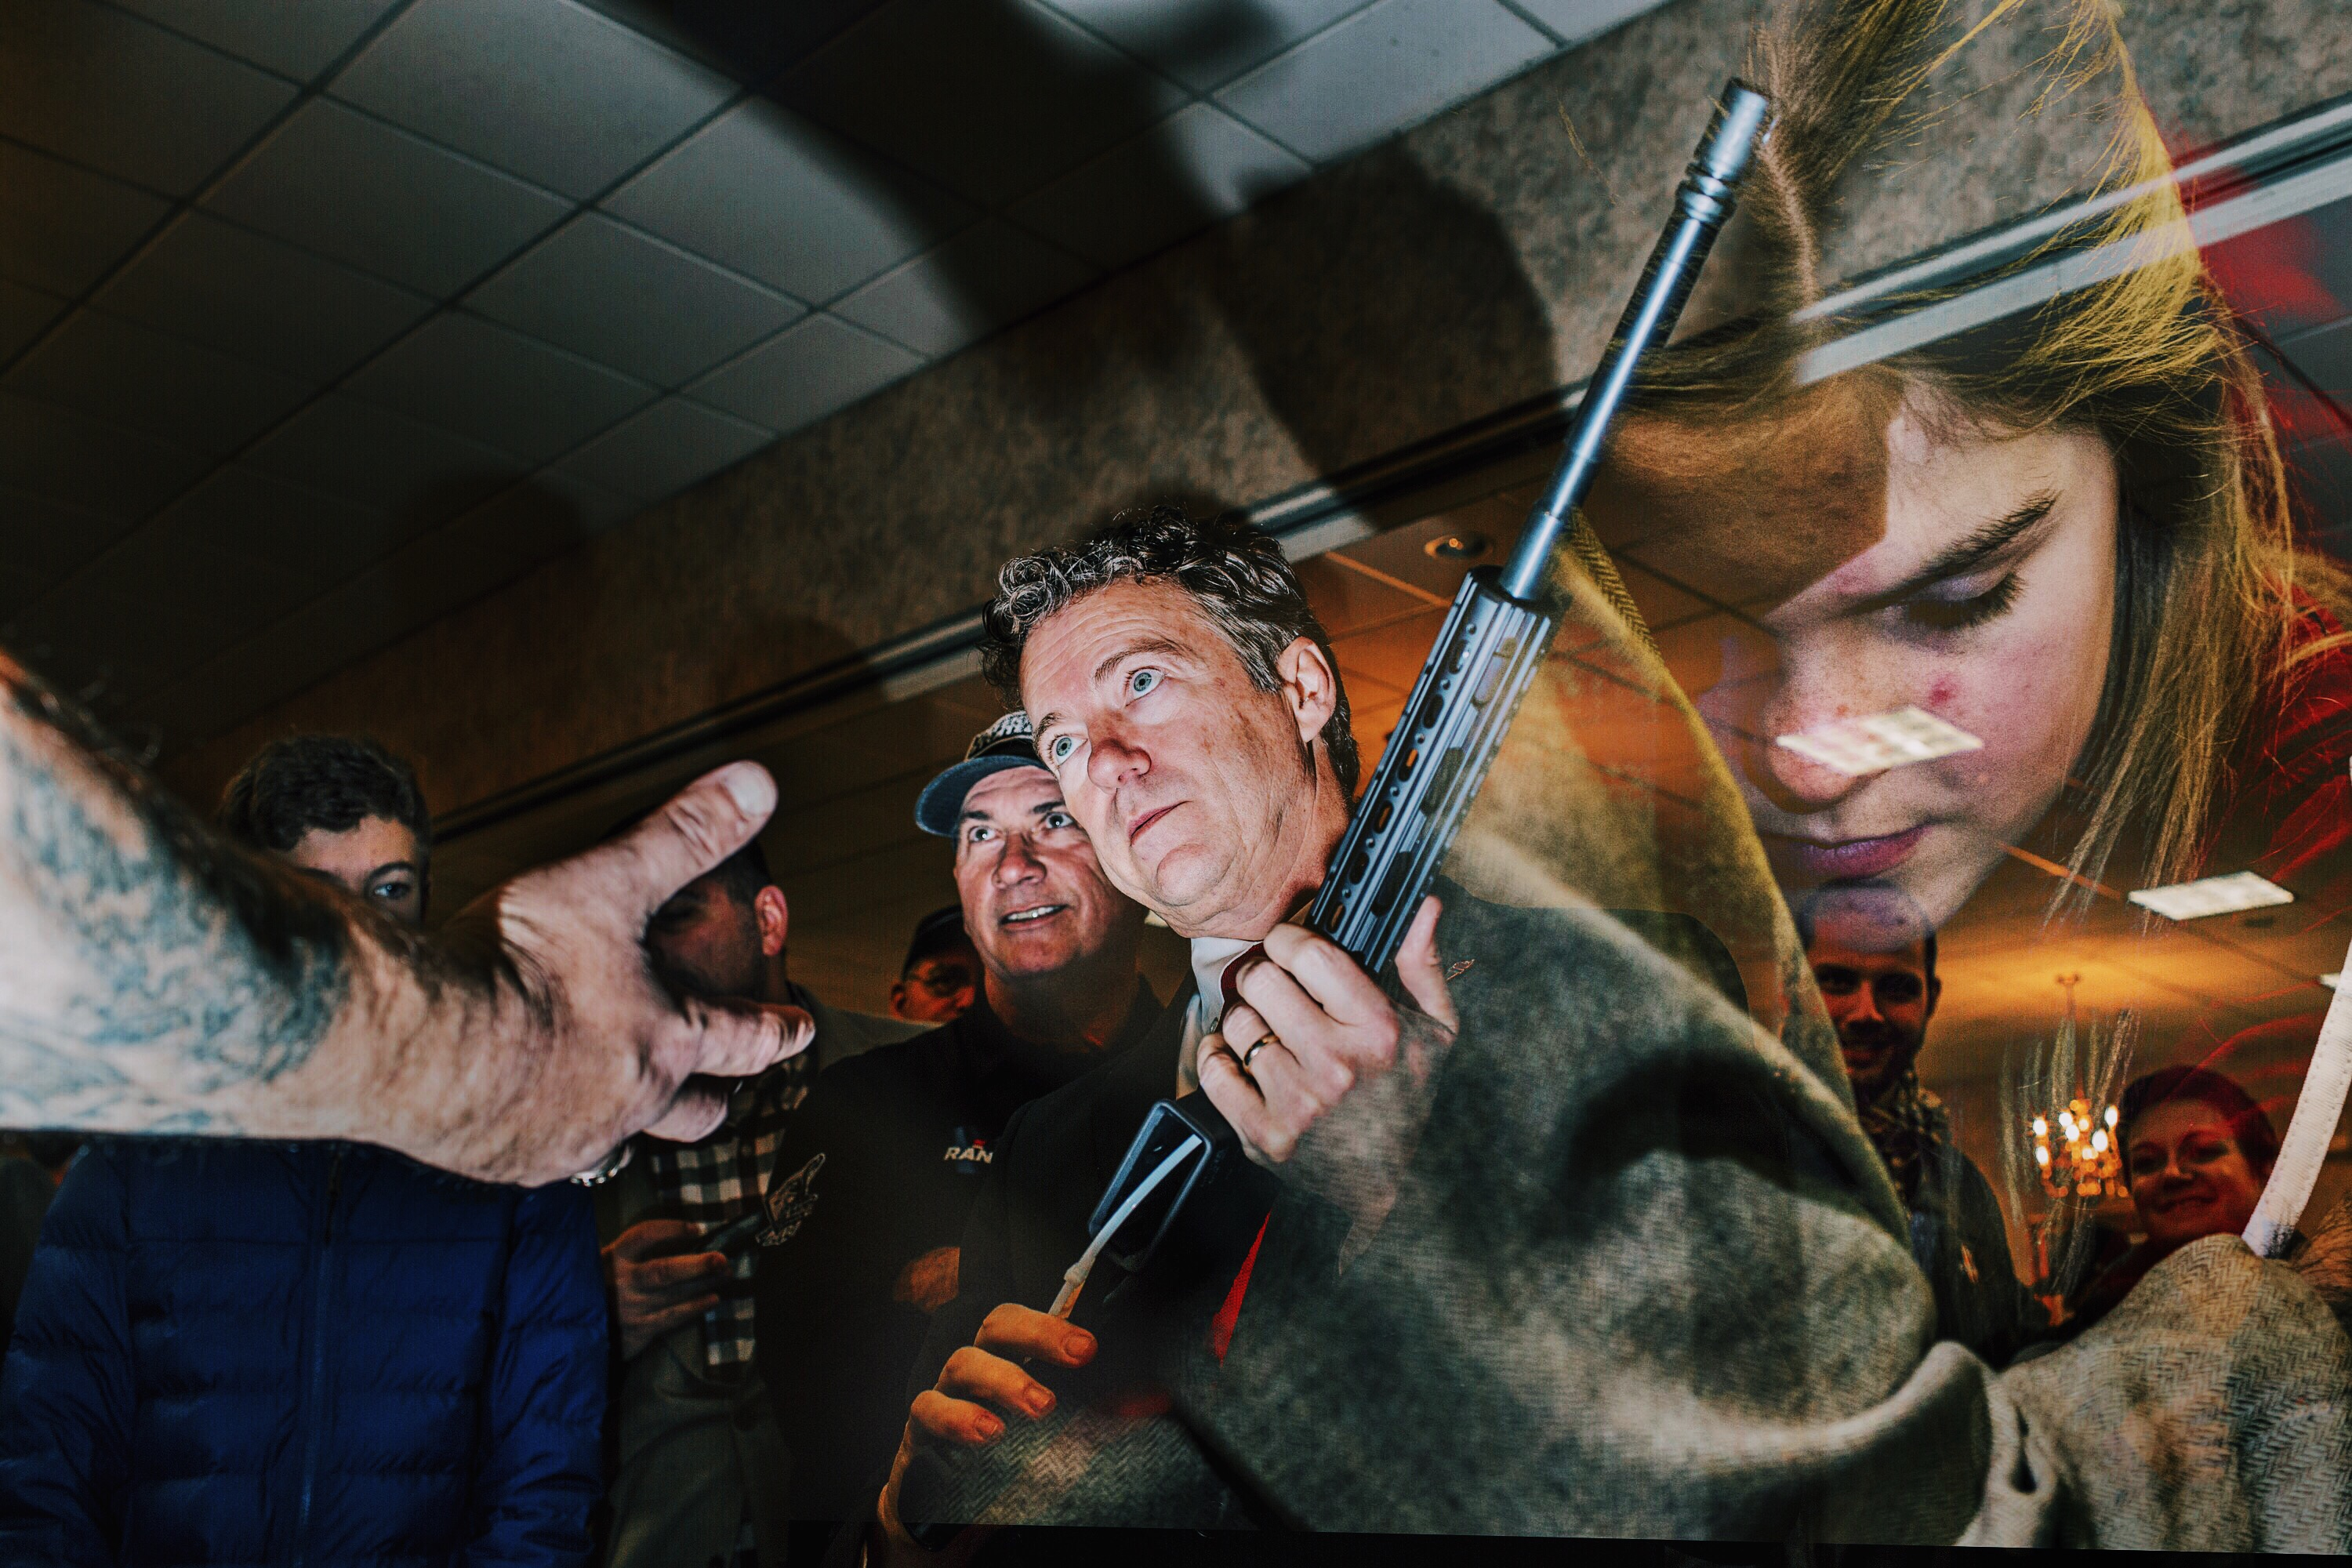 Republican presidential candidate Rand Paul holds a custom-made rifle at a gun show in Concord, N.H. during a campaign stop on Jan. 23, 2016.